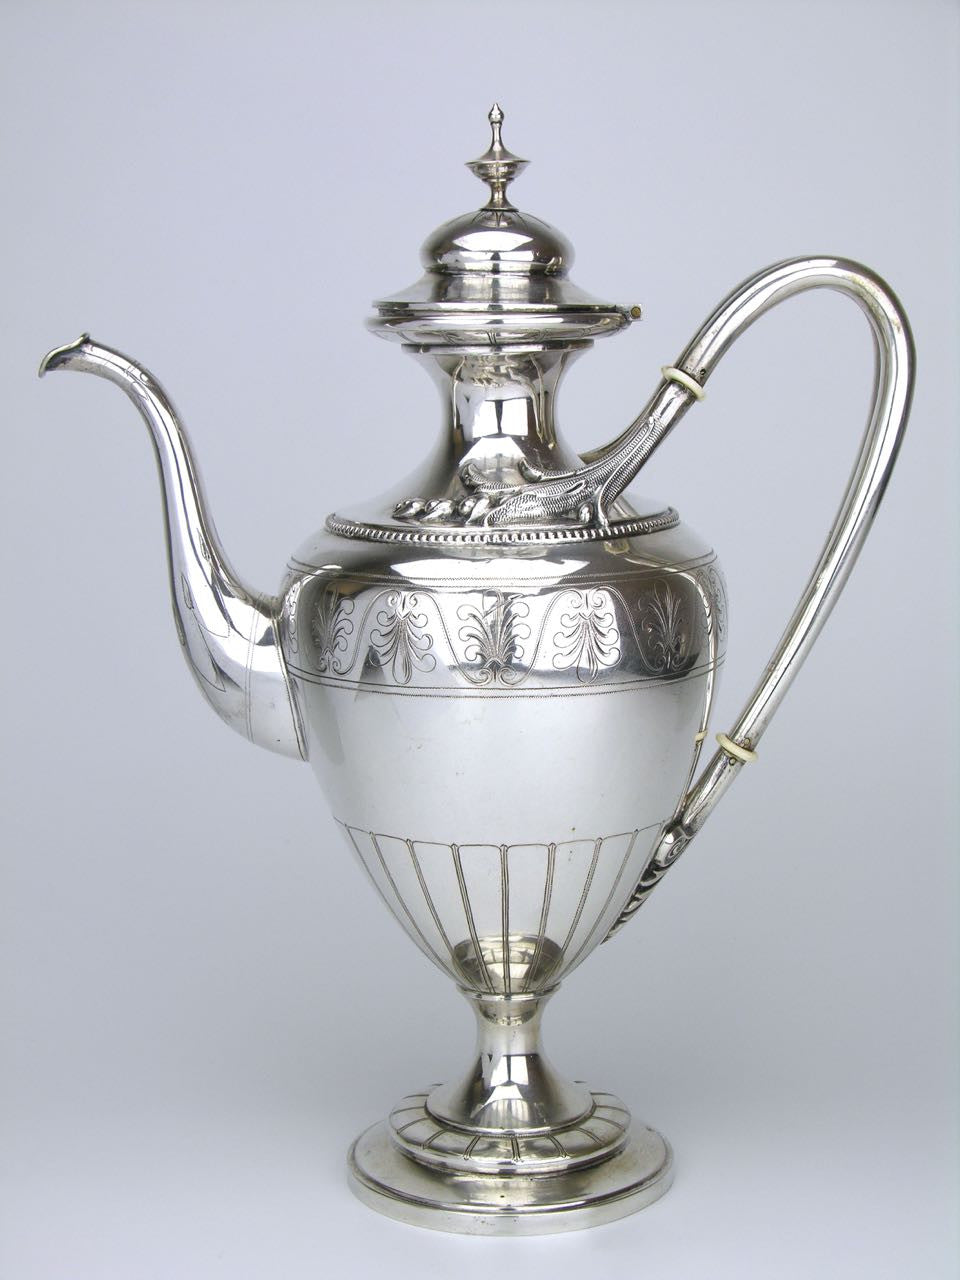 Antique Neoclassical Revival Continental Silver Tea and Coffee Service